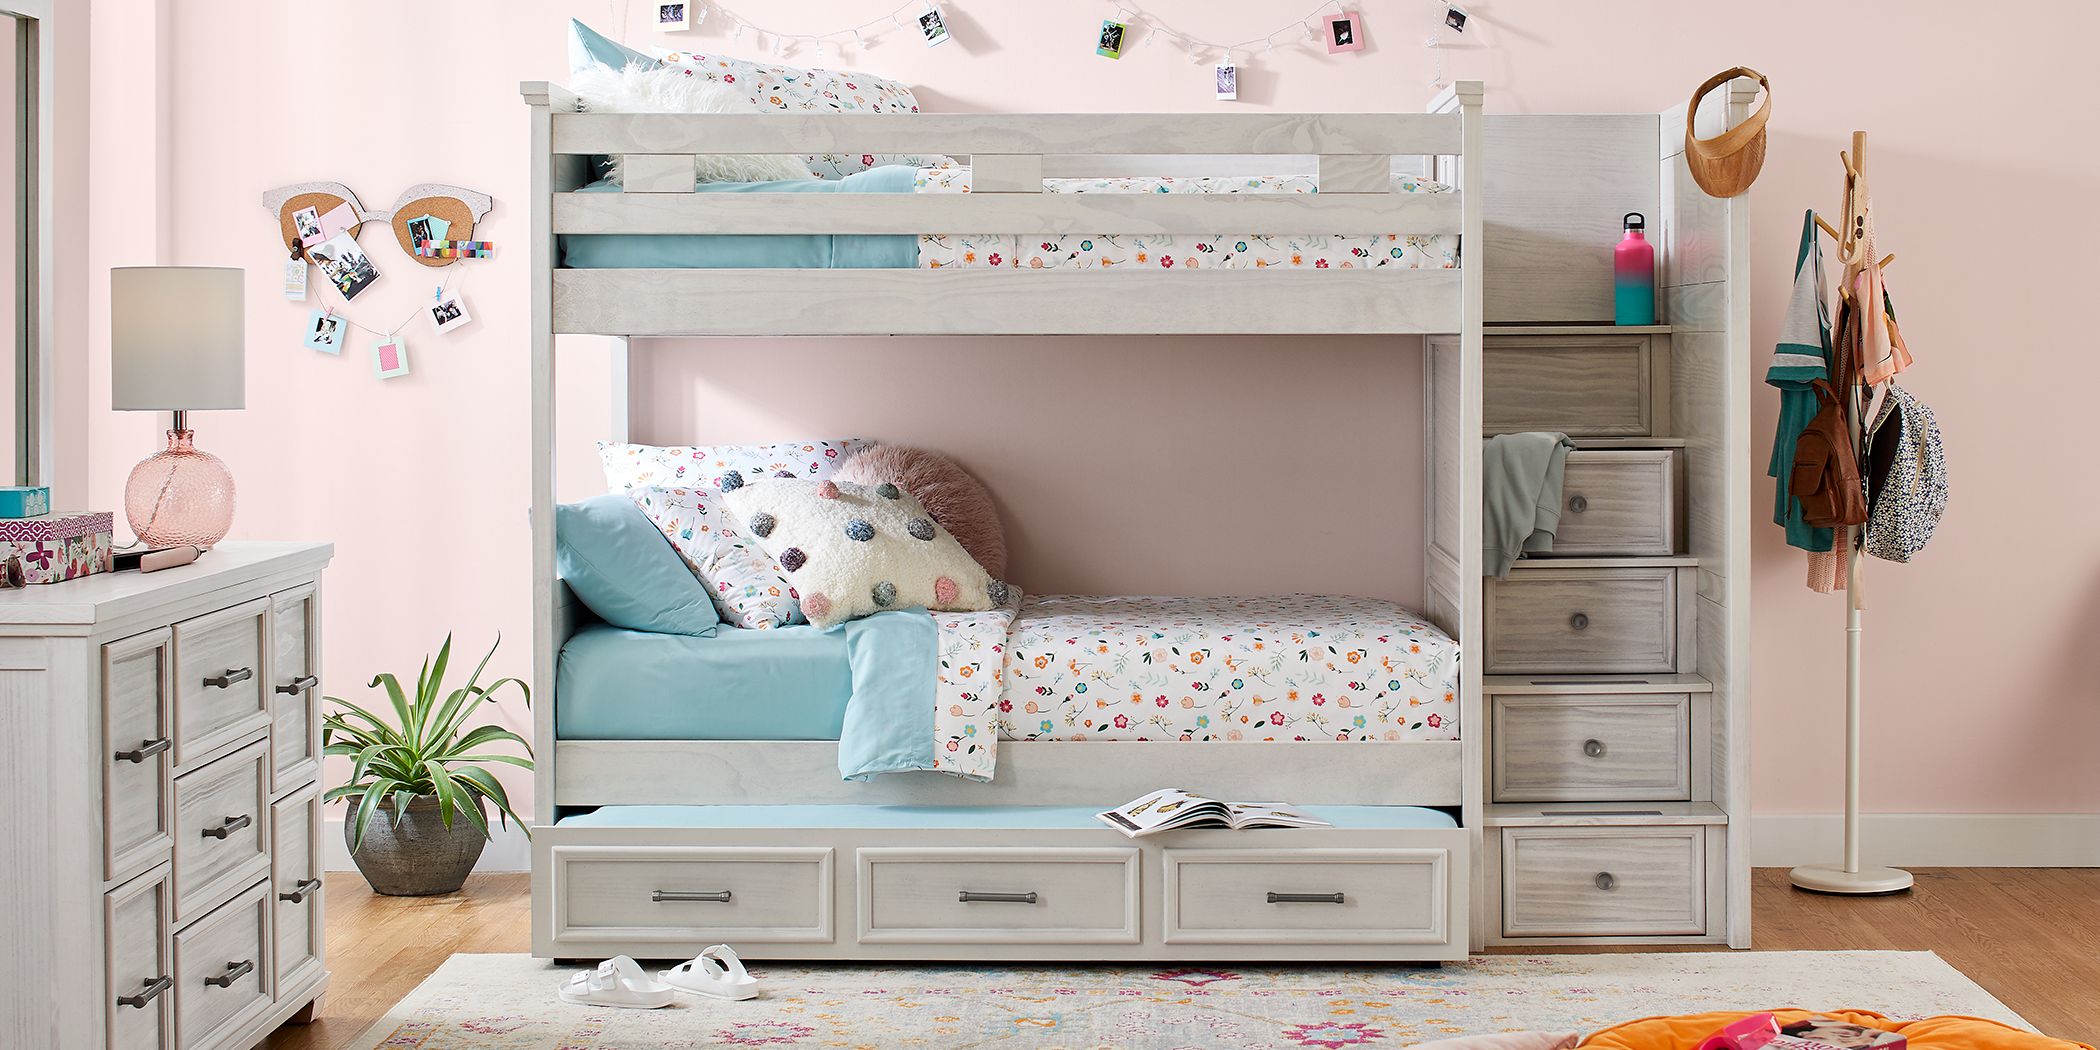 Bunk Bed Dimensions Sizes, Bunk Bed Measurements In Cm